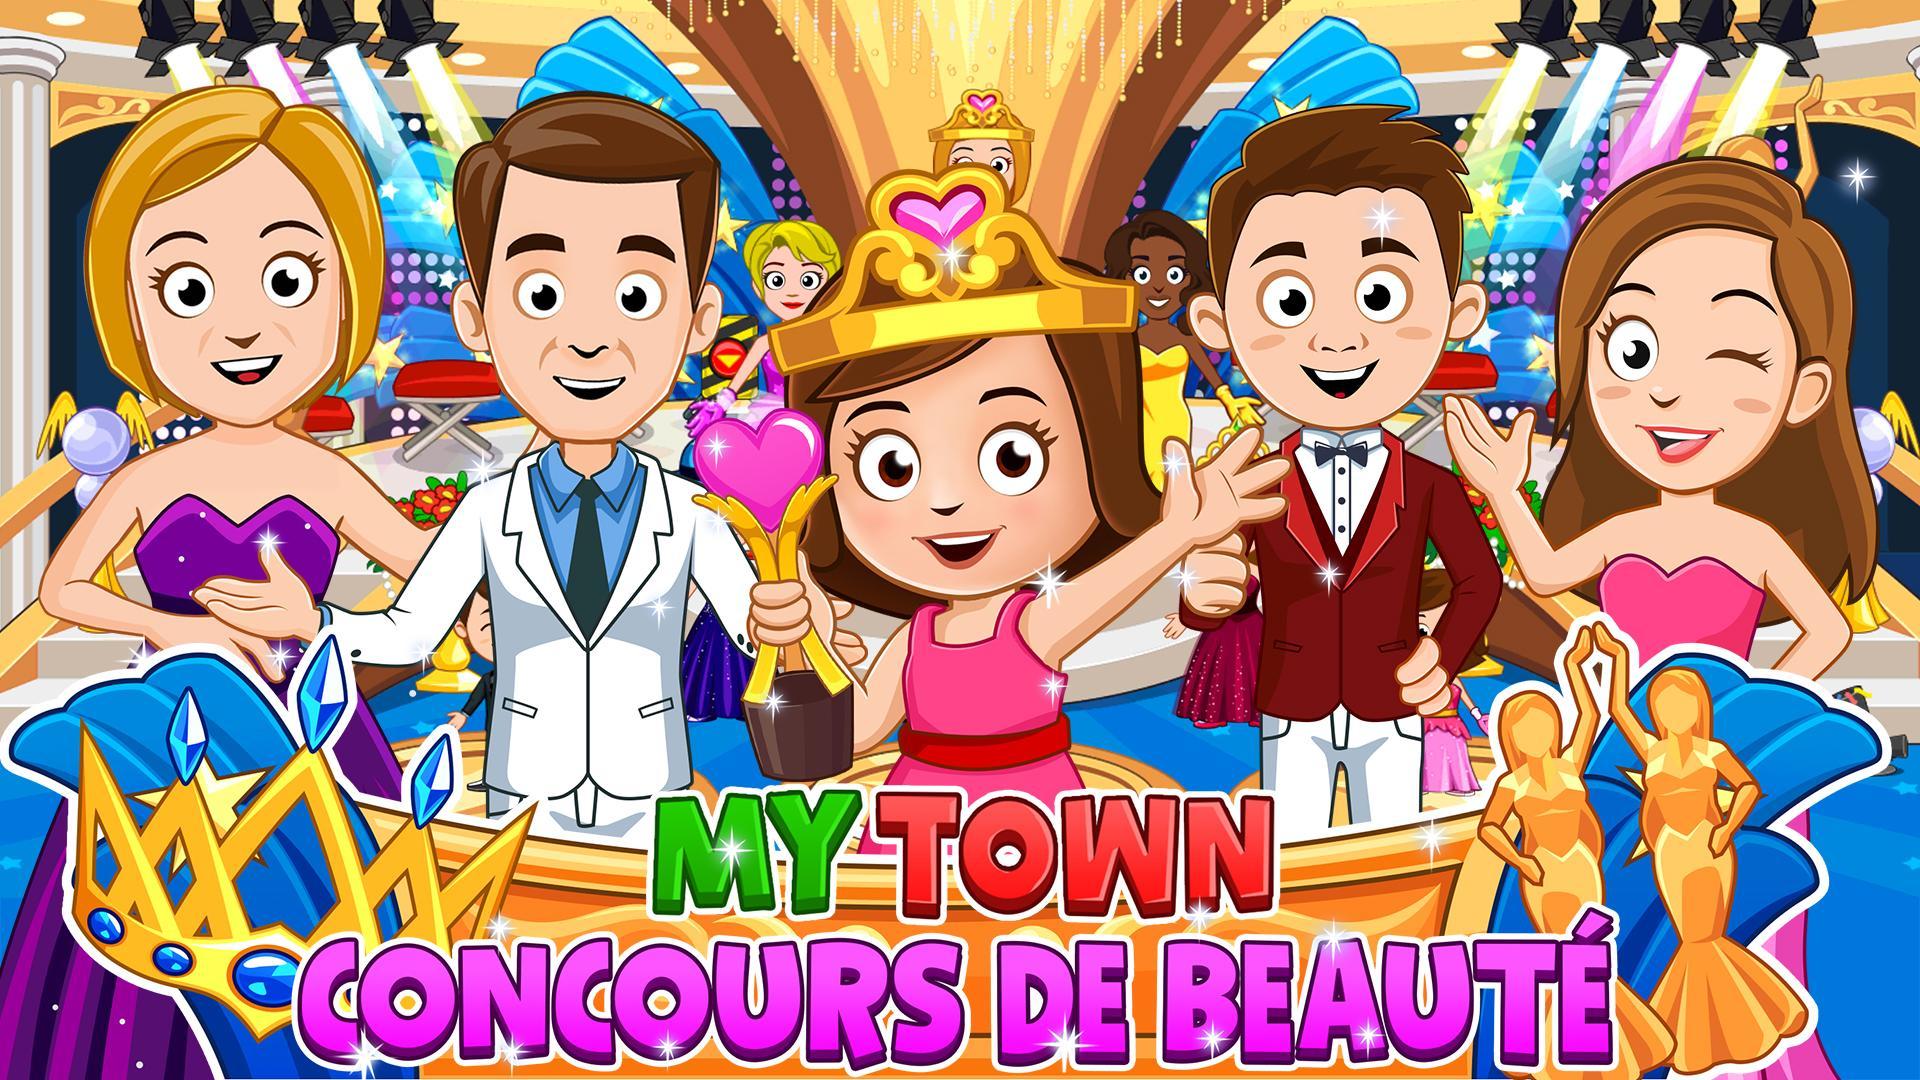 Screenshot 1 of My Town : Beauty Contest 